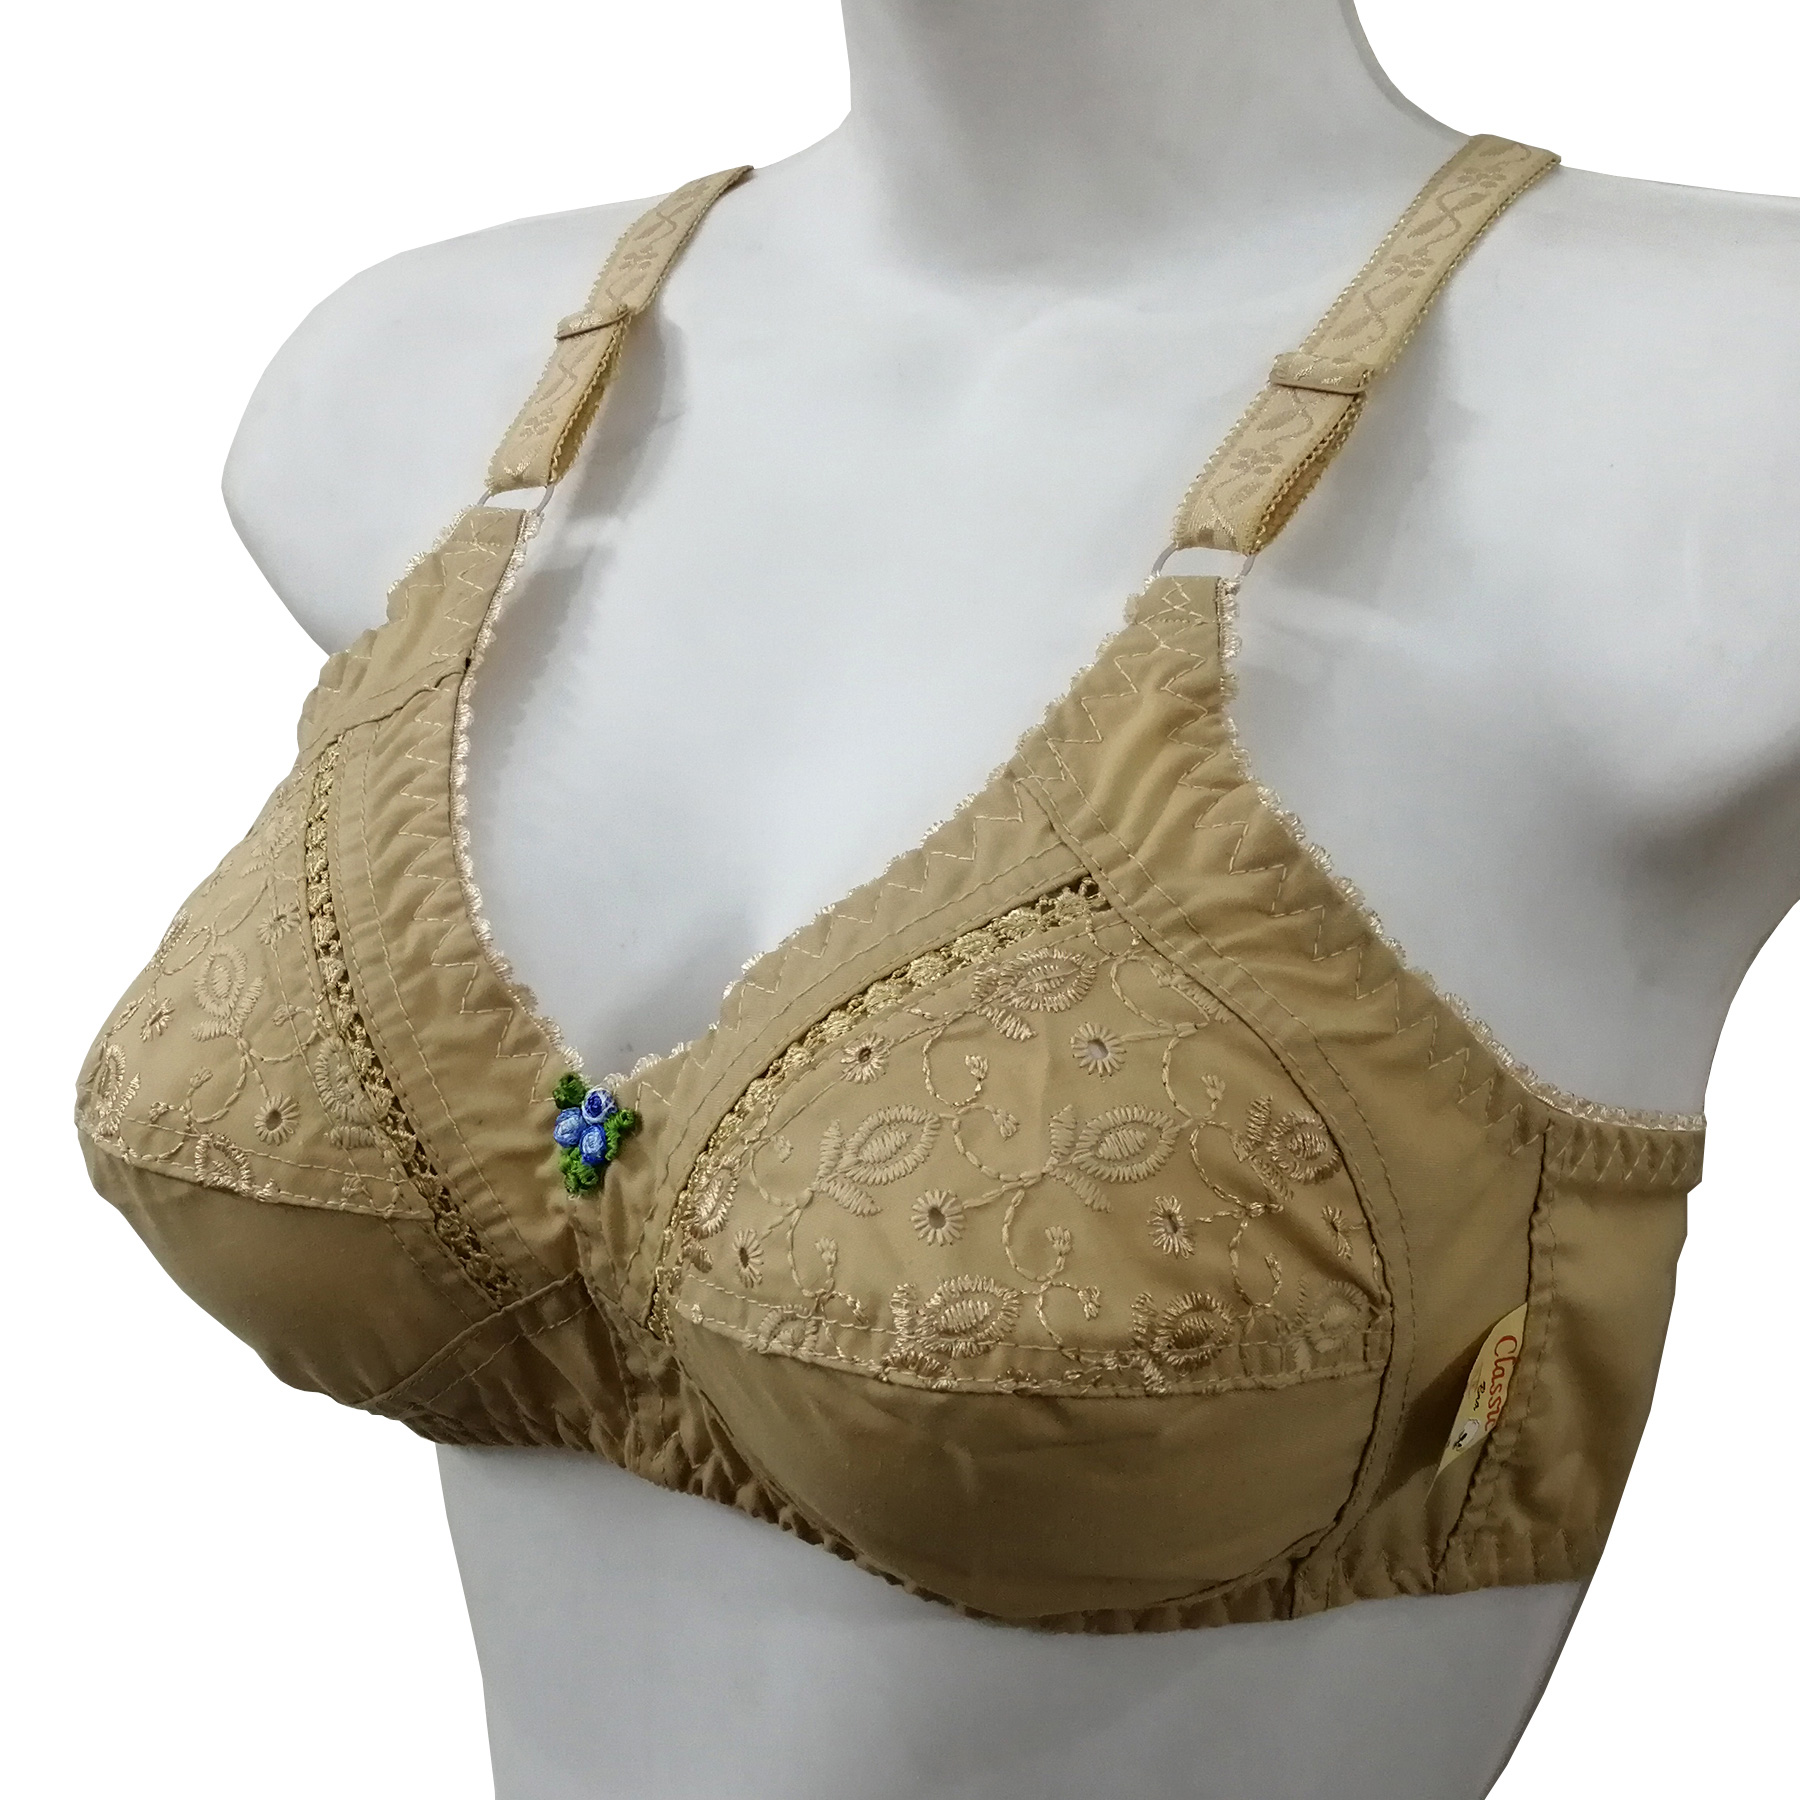 Buy FEMULA Arpita 2Pc Combo of Full Coverage Pure Cotton Bra with Chikan  Embroidery Work on Upper Cups (1 Pc Each of Black & Skin / Beige Colour)  Size 28D Online at